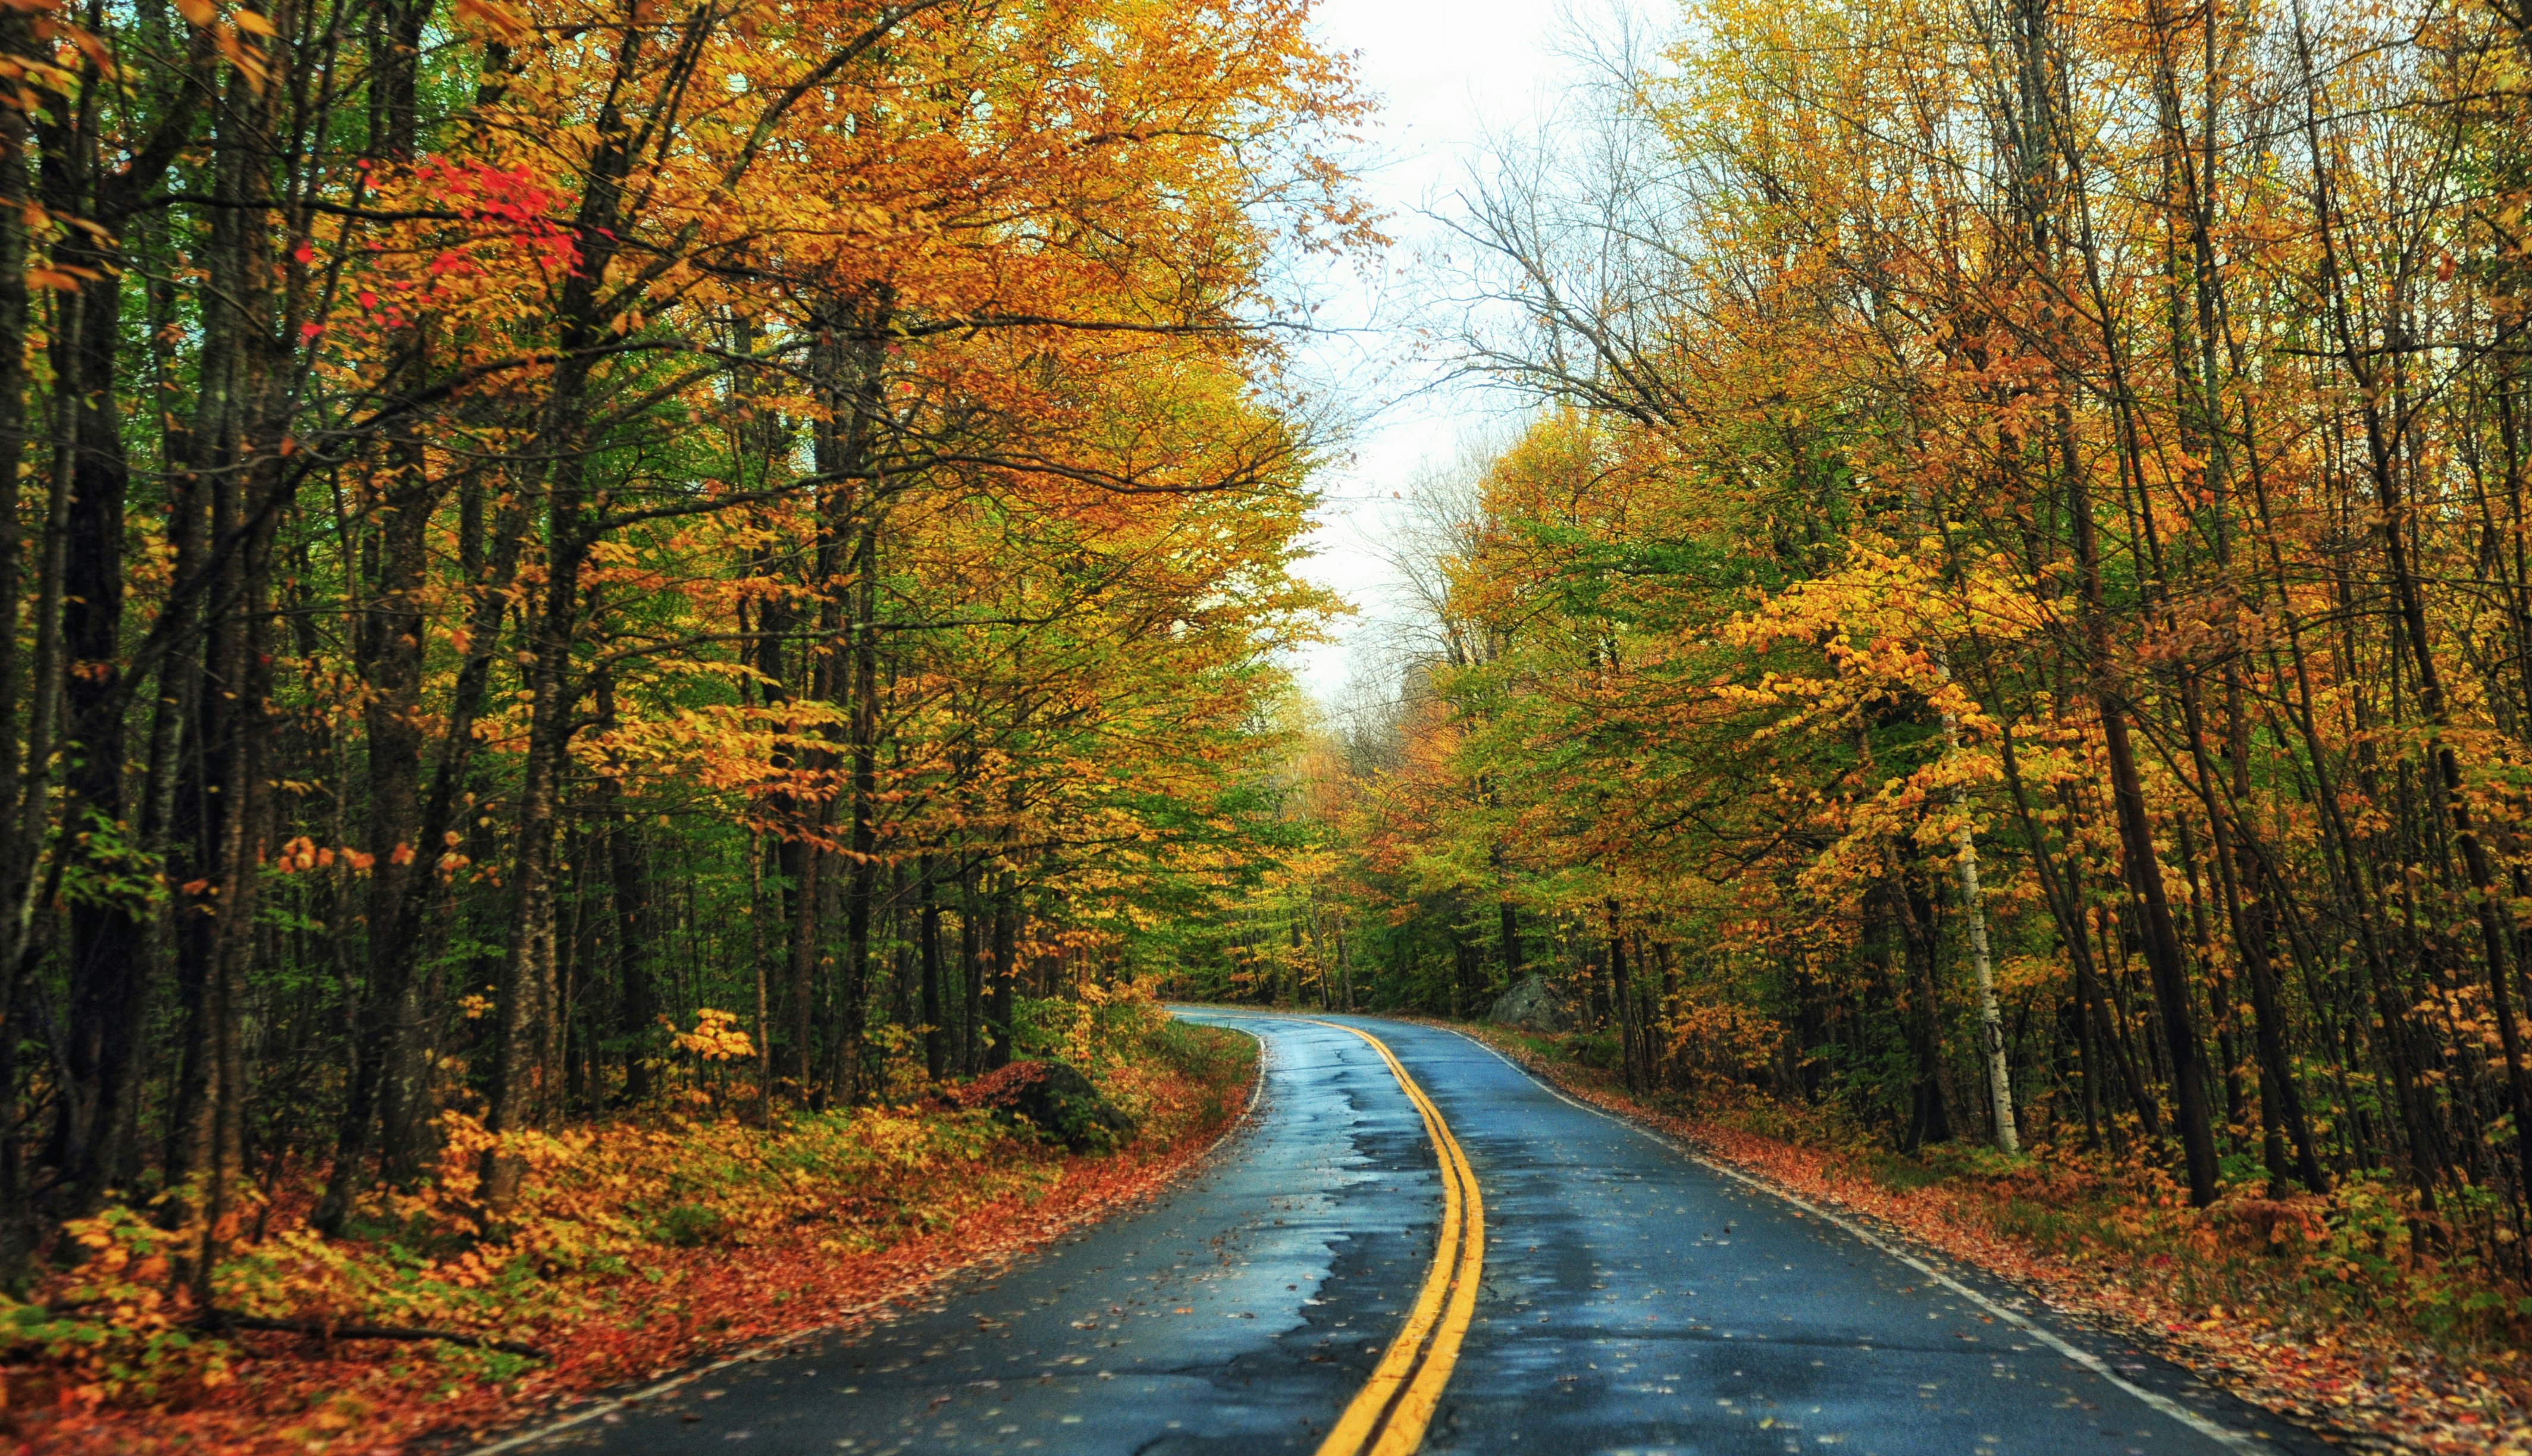 A road winds through trees in autumn